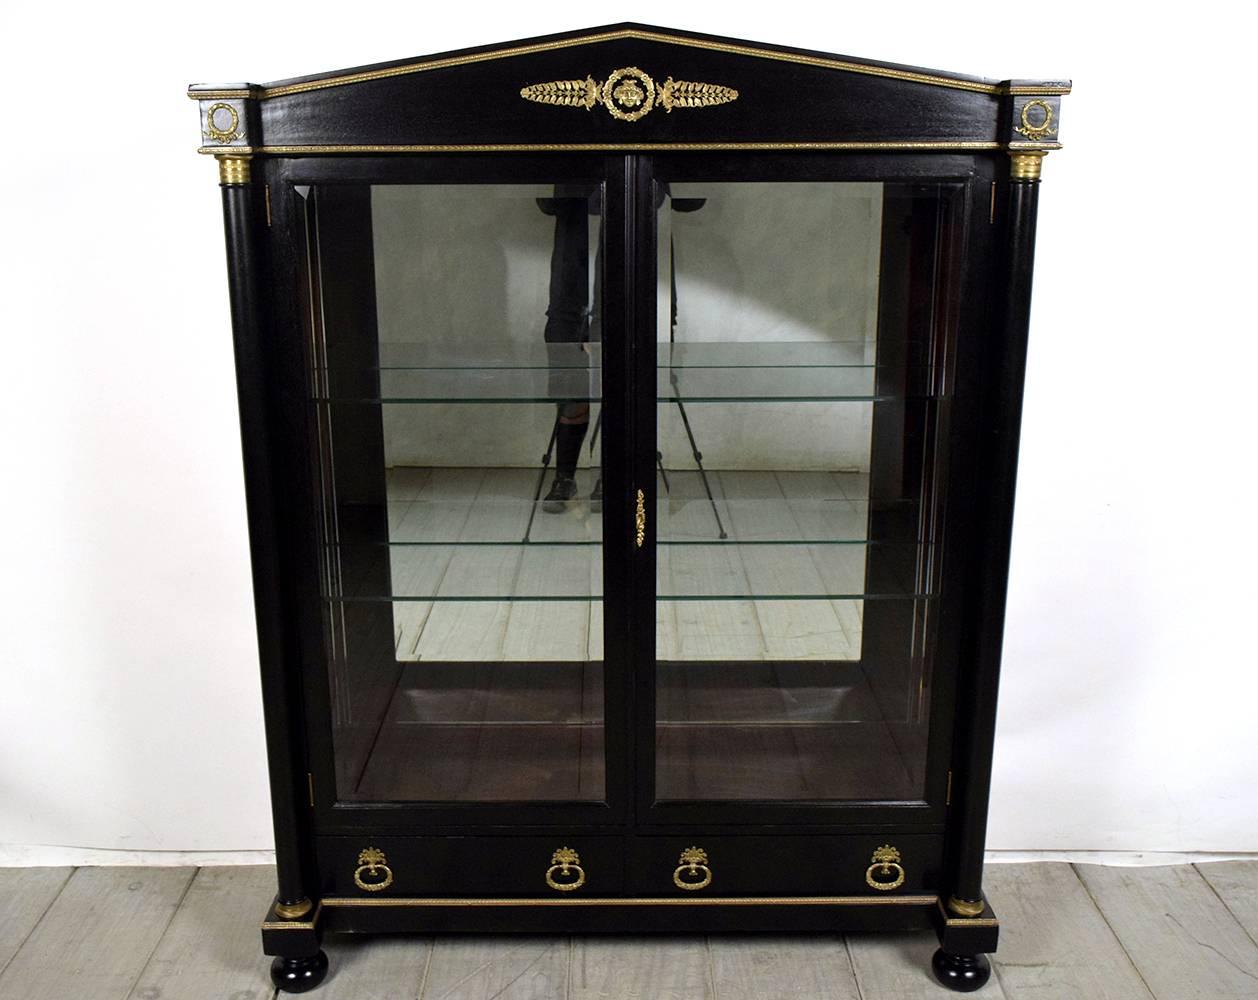 This 19th Century French Empire-style two door display Cabinet is recently finish in a black color with a lacquer finish. There are bronze ormolu decorations through out the facade of the frame. At the center of the top frame there is a bronze face